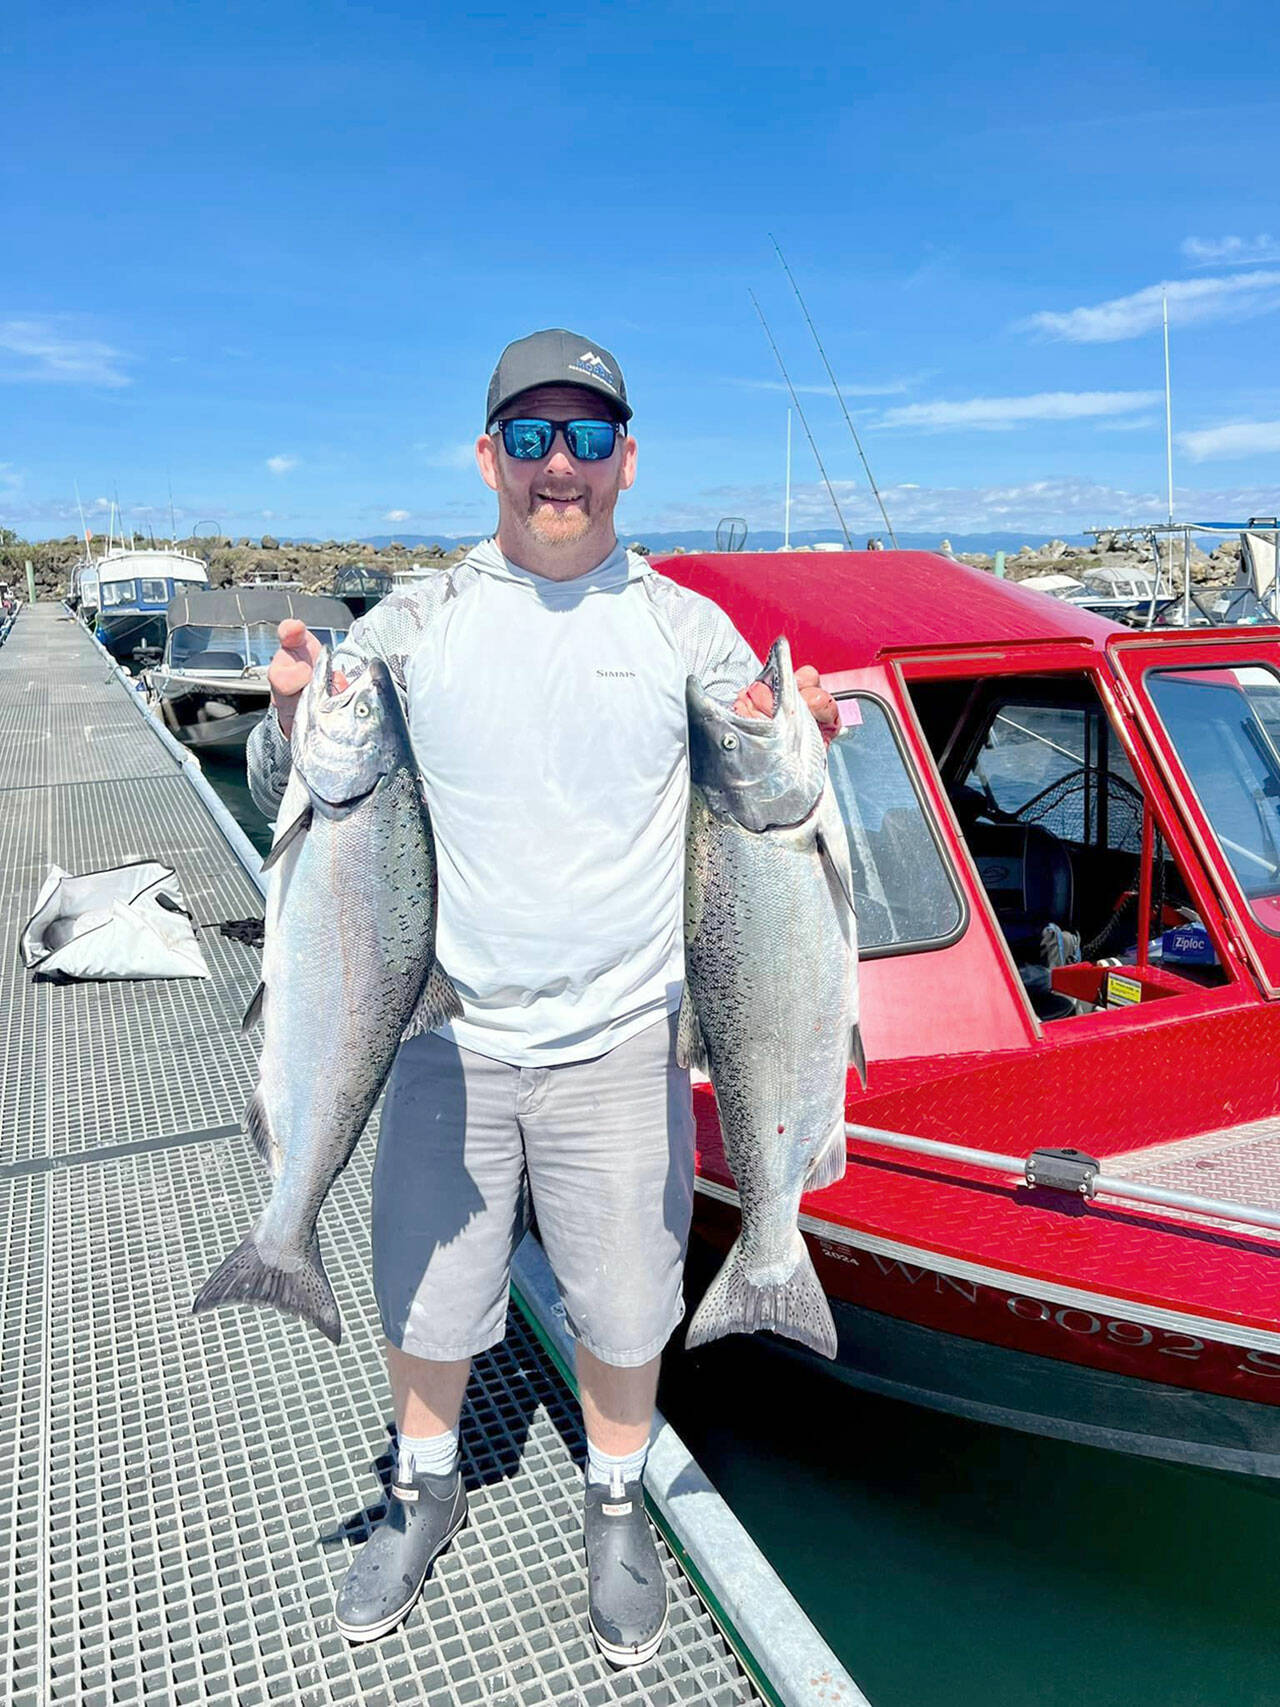 Lake Stevens’ Taylor Morris found success chinook fishing off Sekiu last weekend before the king fishery closed Aug. 15. Morris used a 3.0 Herring Aide spoon by Silver Horde with a green/silver pro toll flasher. All the kings he caught were between 70-85 feet on the downrigger in 90 to 120 feet of water.